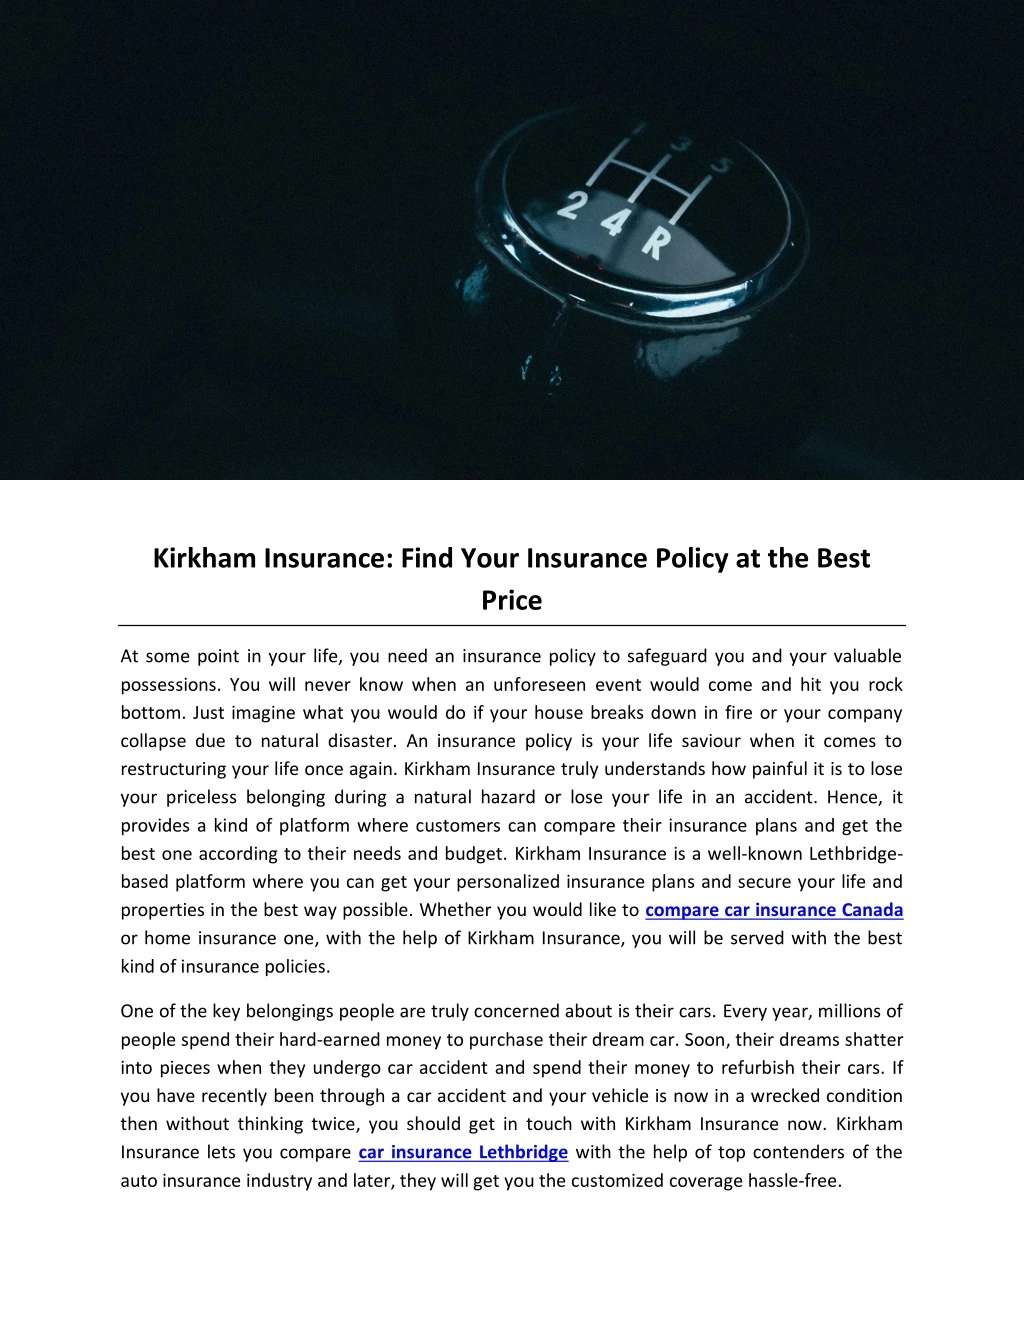 kirkham insurance find your insurance policy